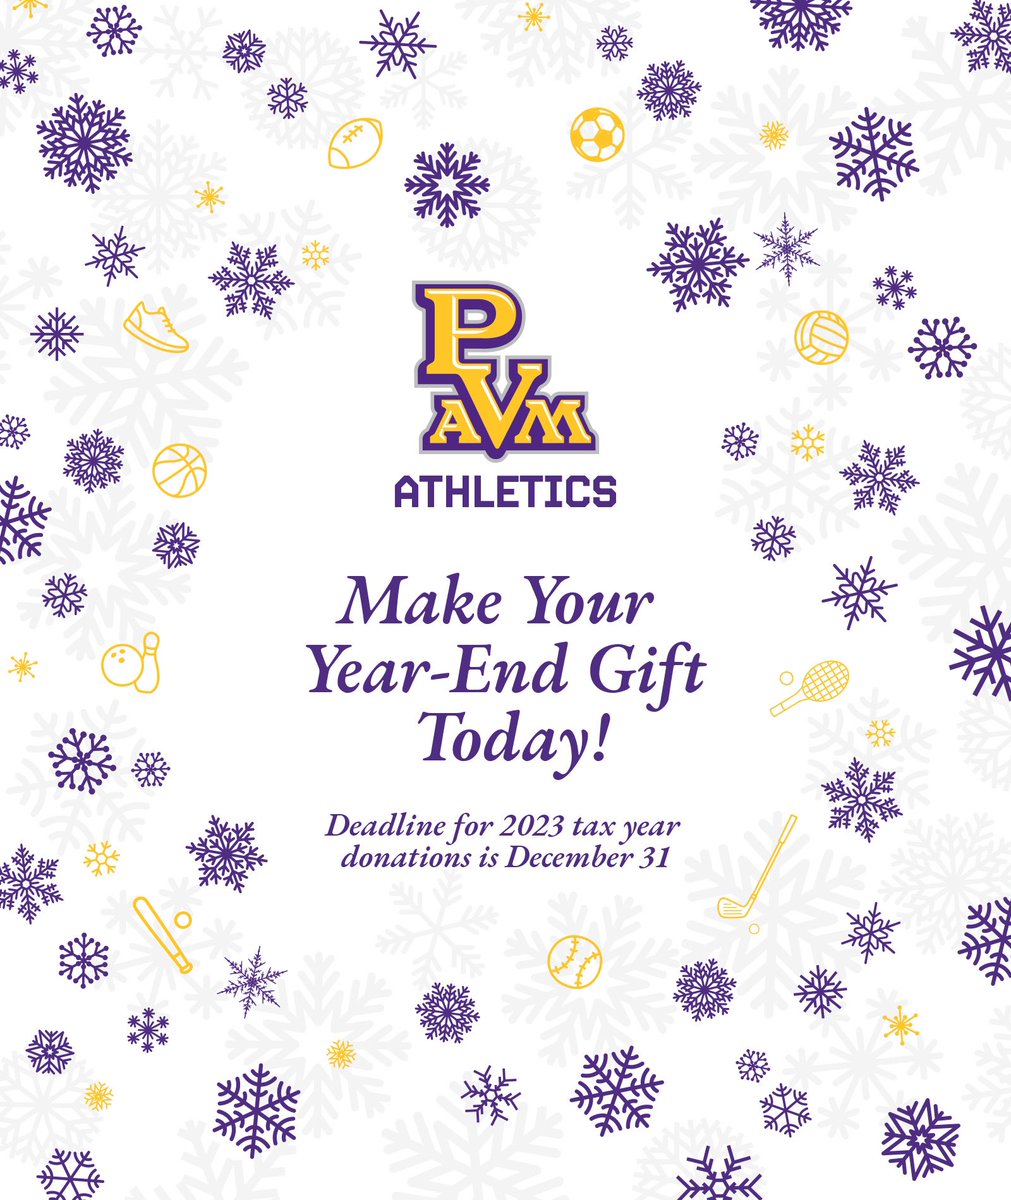 🎉 Support PVAMU Athletics with Your Year-End Gift! 🎁 EVERY gift, EVERY year, big or small, makes a difference for our student-athletes. Give Today!
 
🌟 host.nxt.blackbaud.com/donor-form/?sv… click the link! 
 
#WhereChampionsAreBuilt #ExcellenceLivesHere”